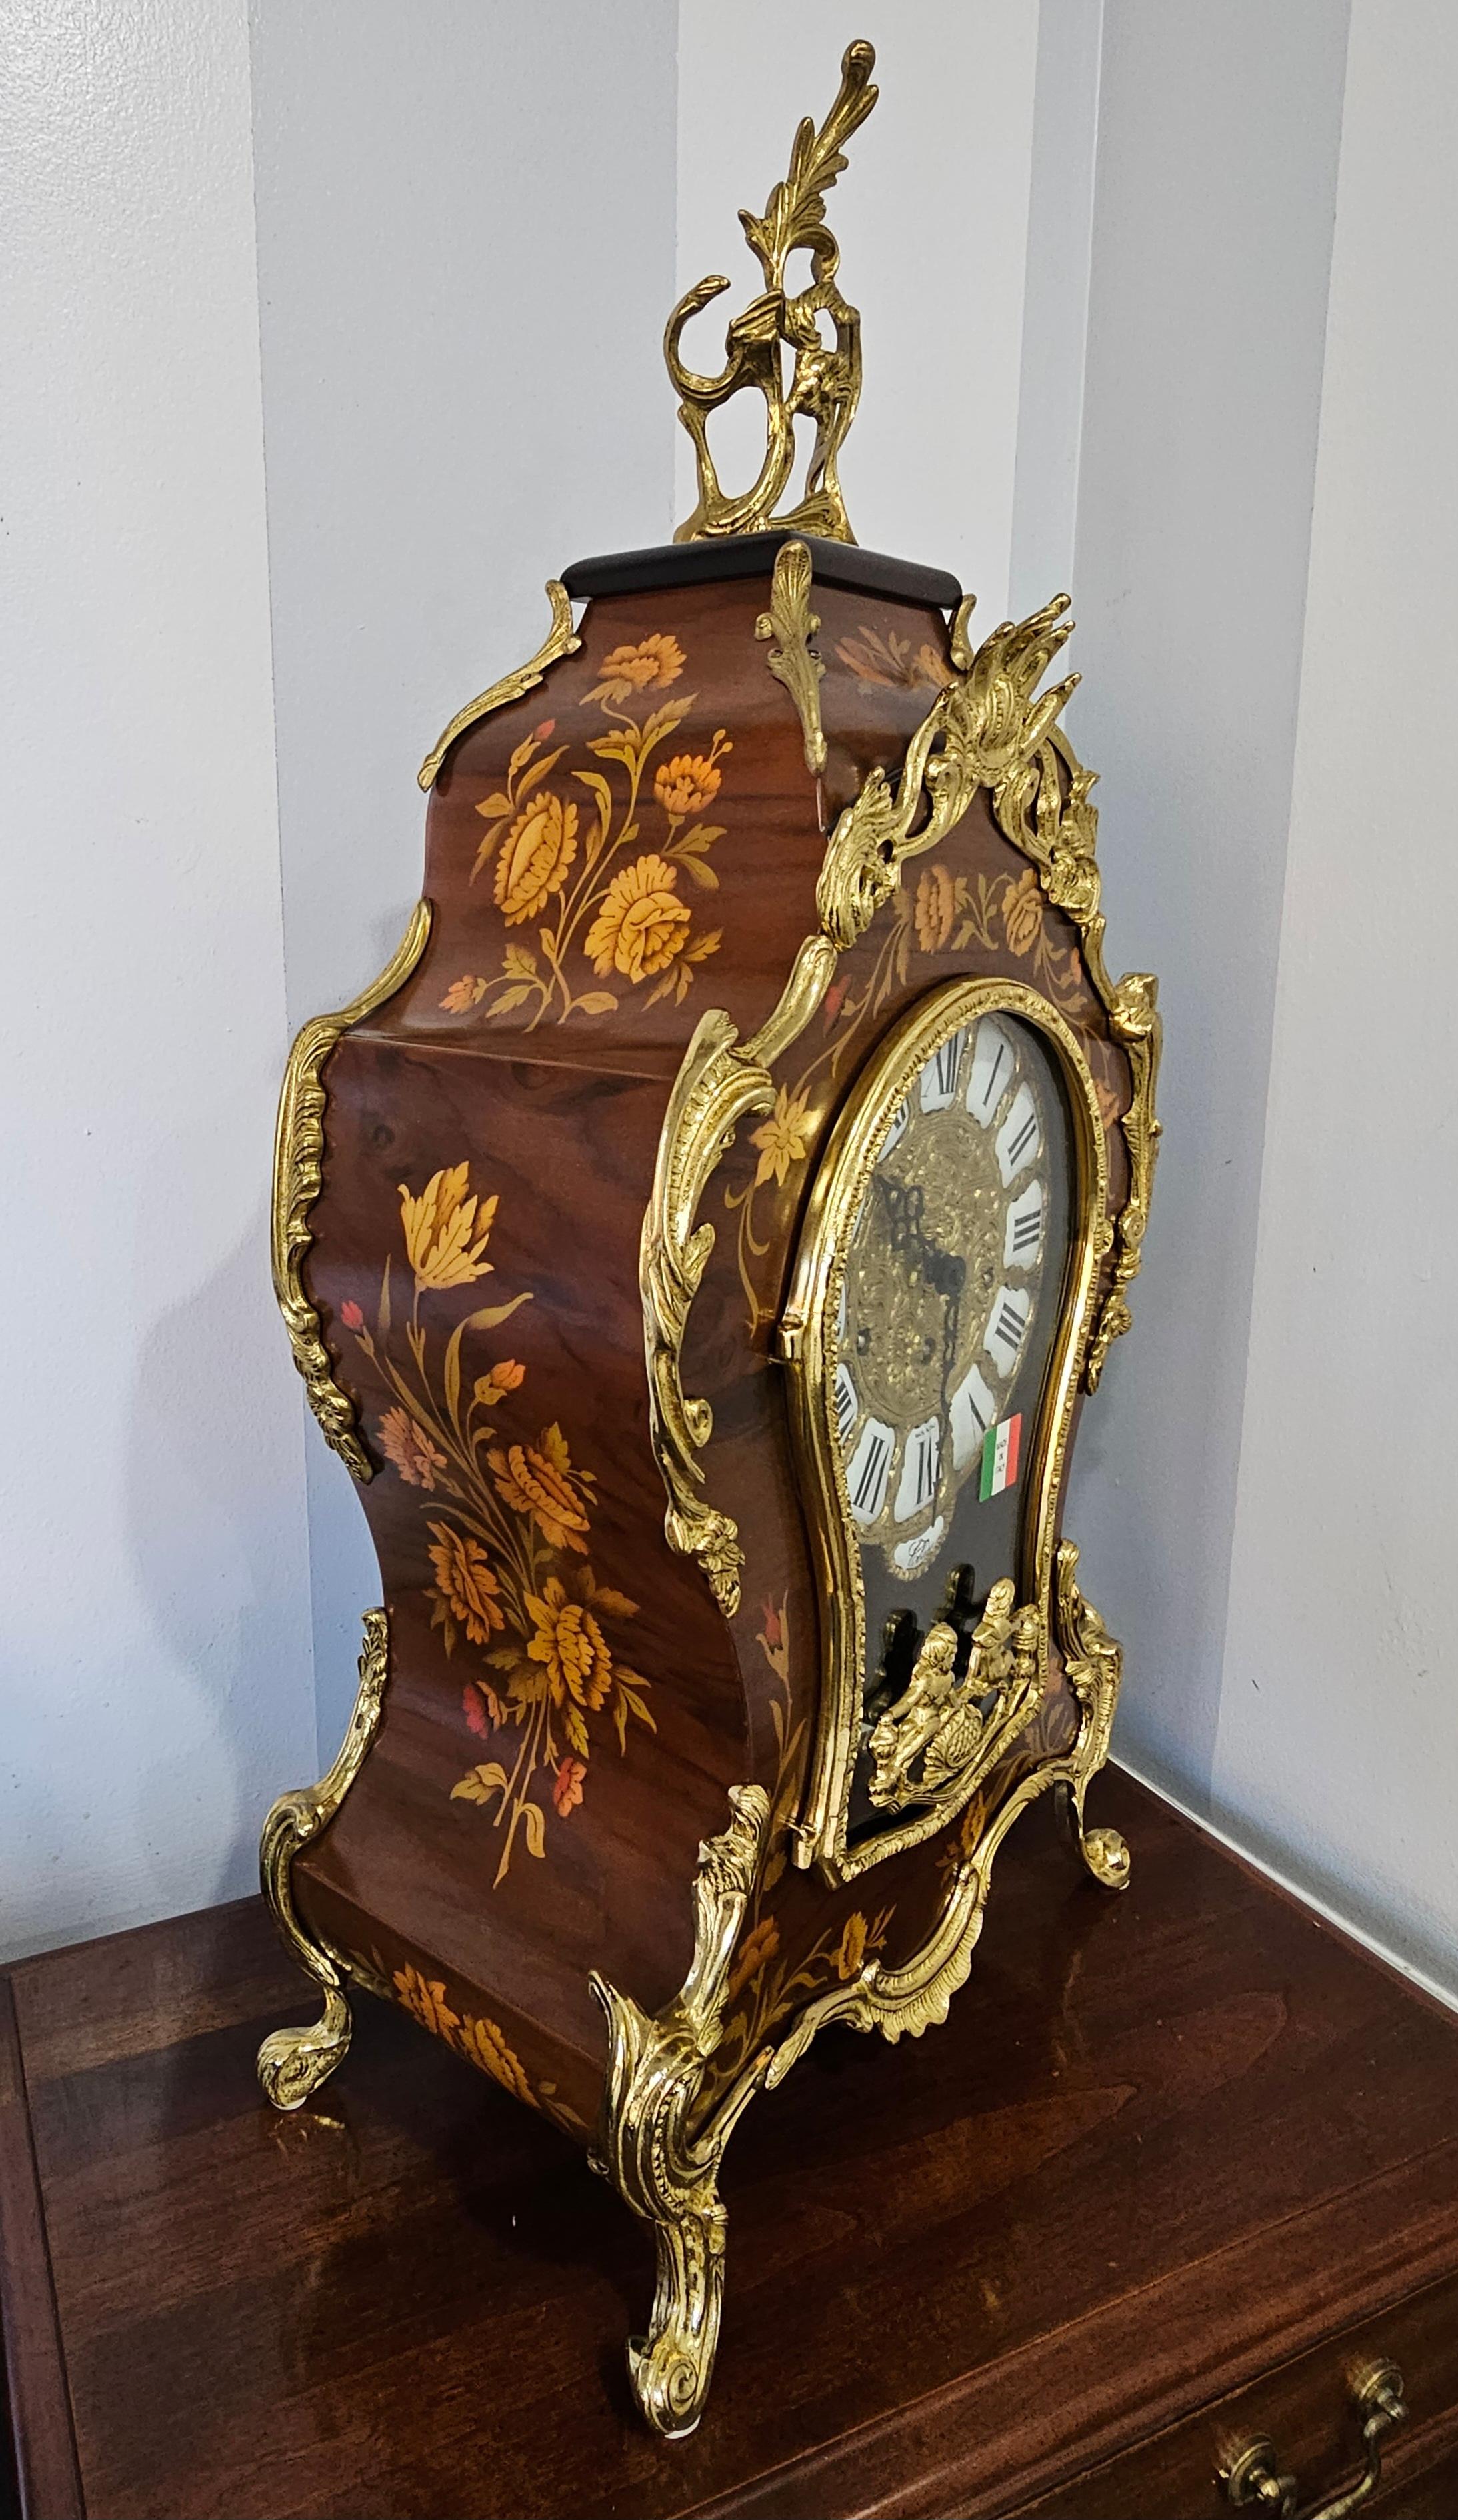 Contemporary New Franz Hermle Mantel Clock in DeArt Italian Fine Marquetry and Ormolu Case, N For Sale